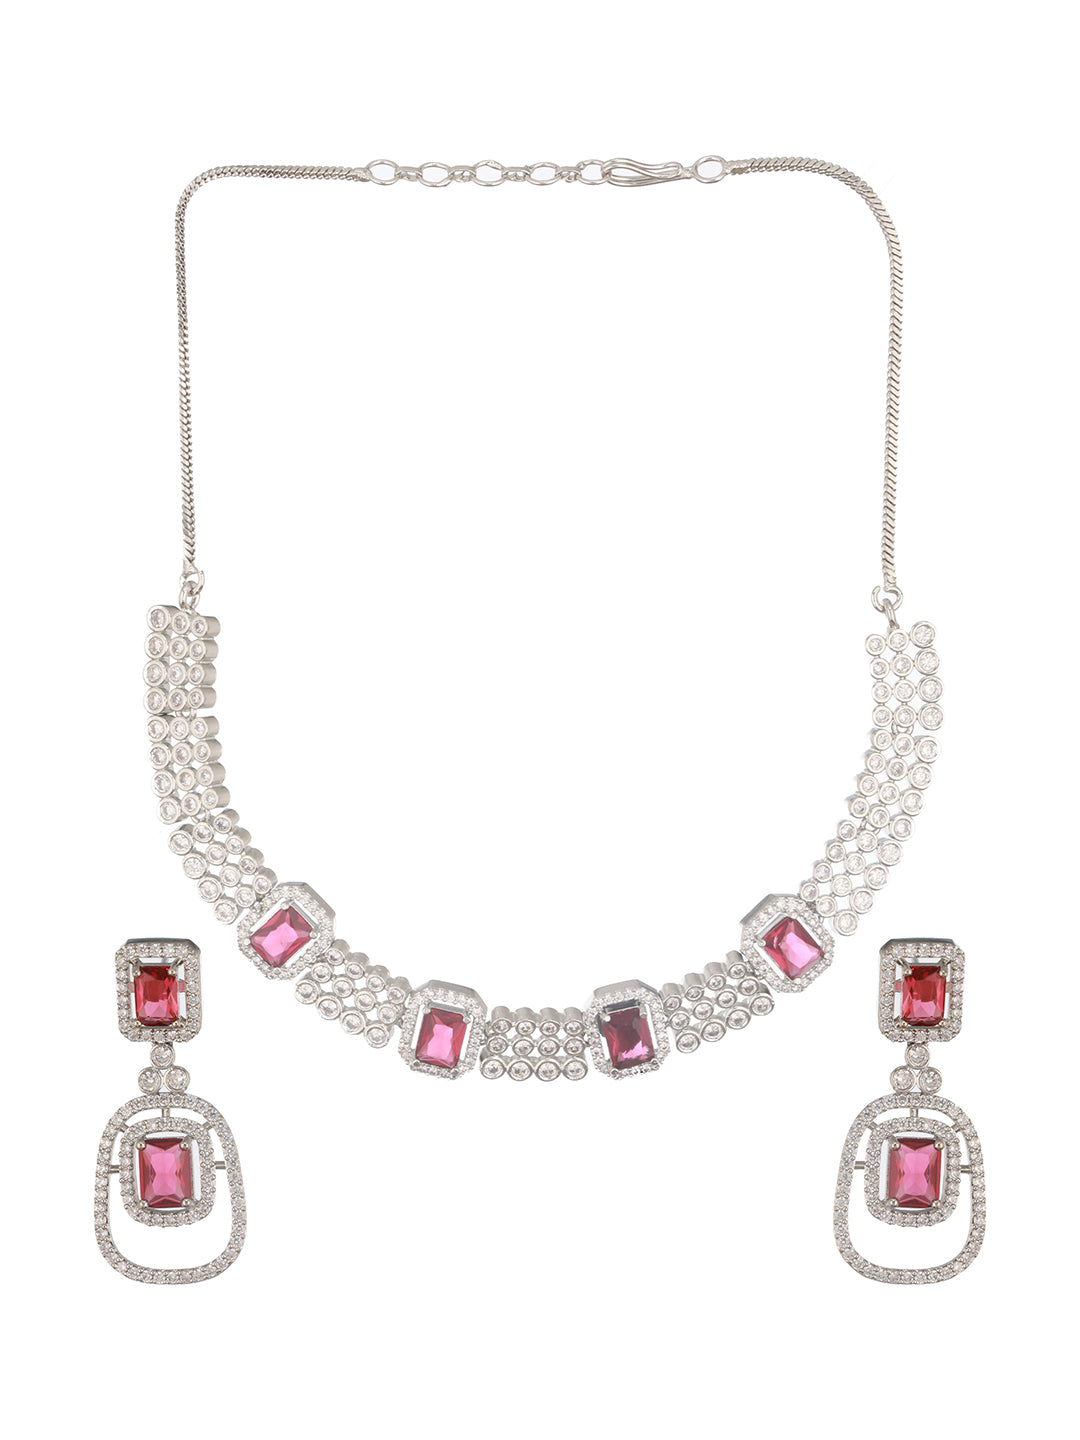 Jazz And Sizzle Silver Plated Red American Diamond Studded Handcrafted Jewelry Set - Jazzandsizzle